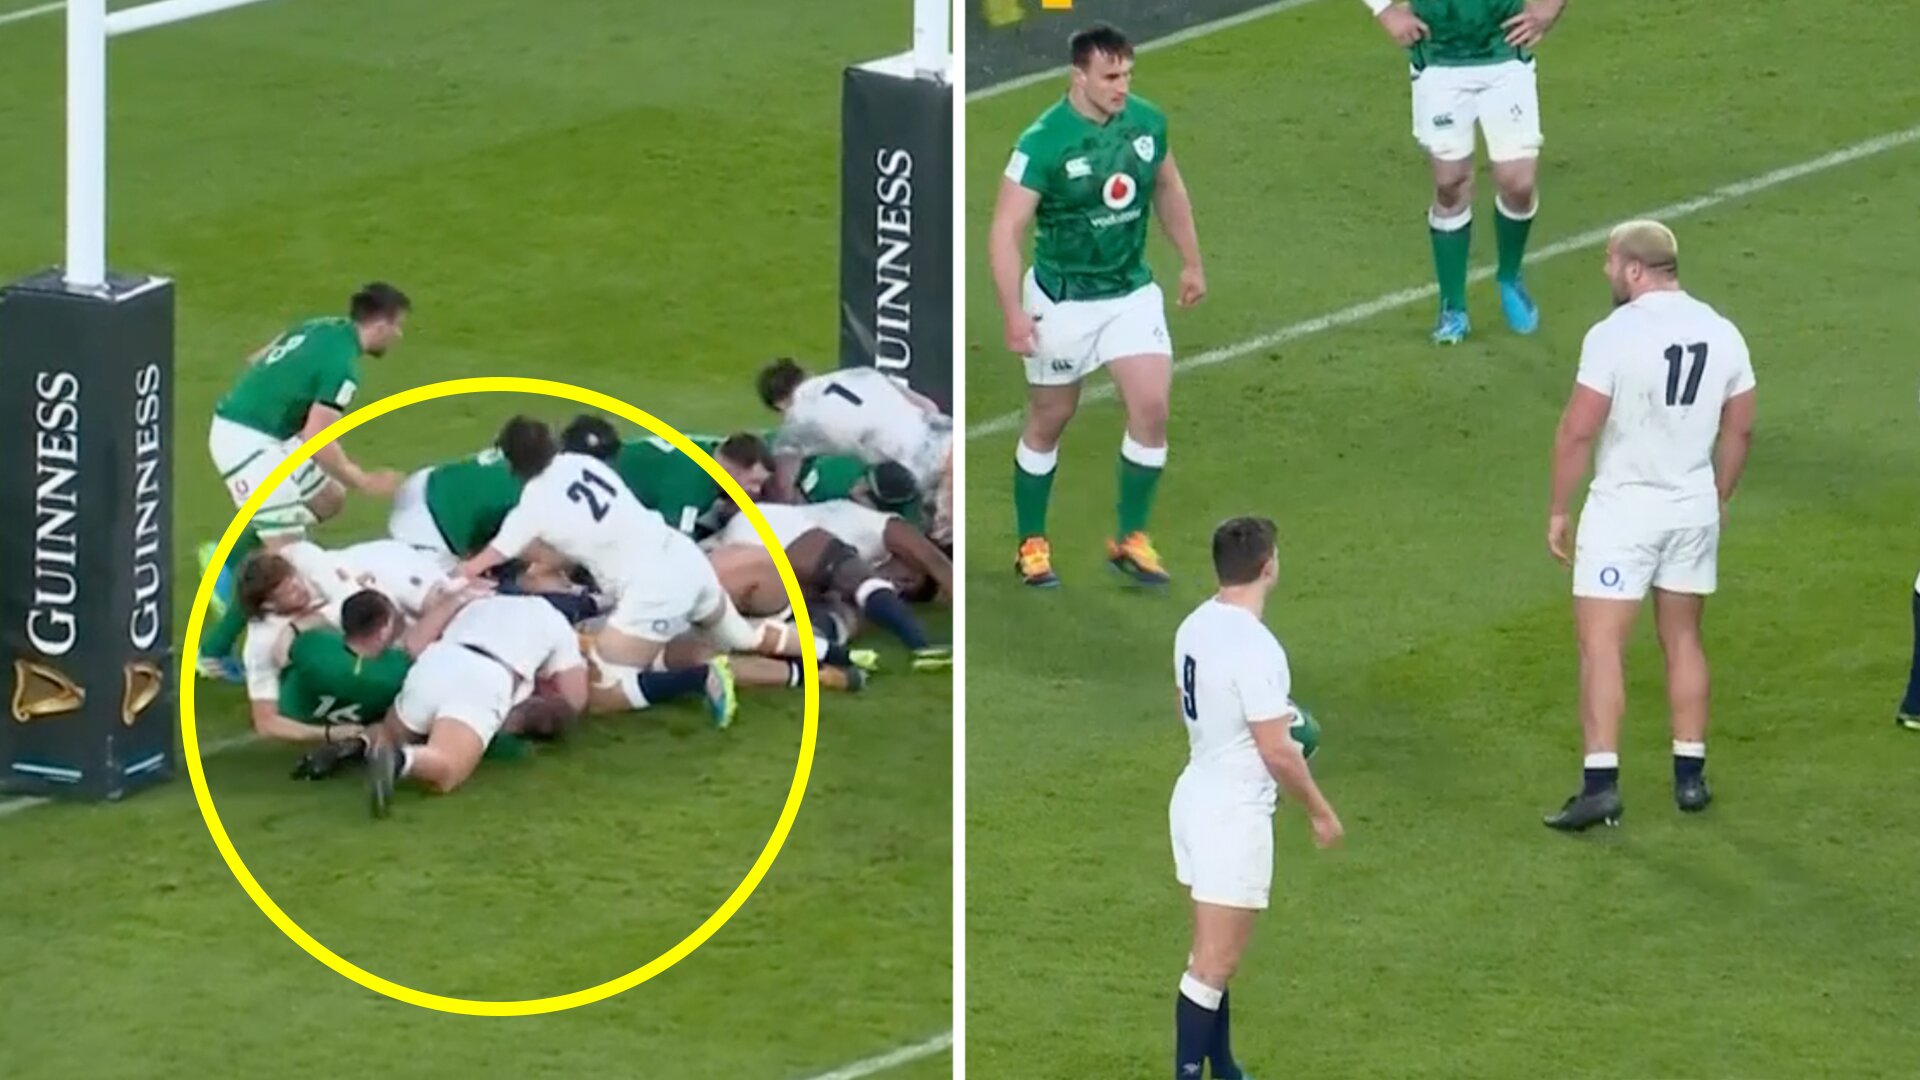 Outrage after Ellis Genge 'assaults' player in Six Nations against Ireland